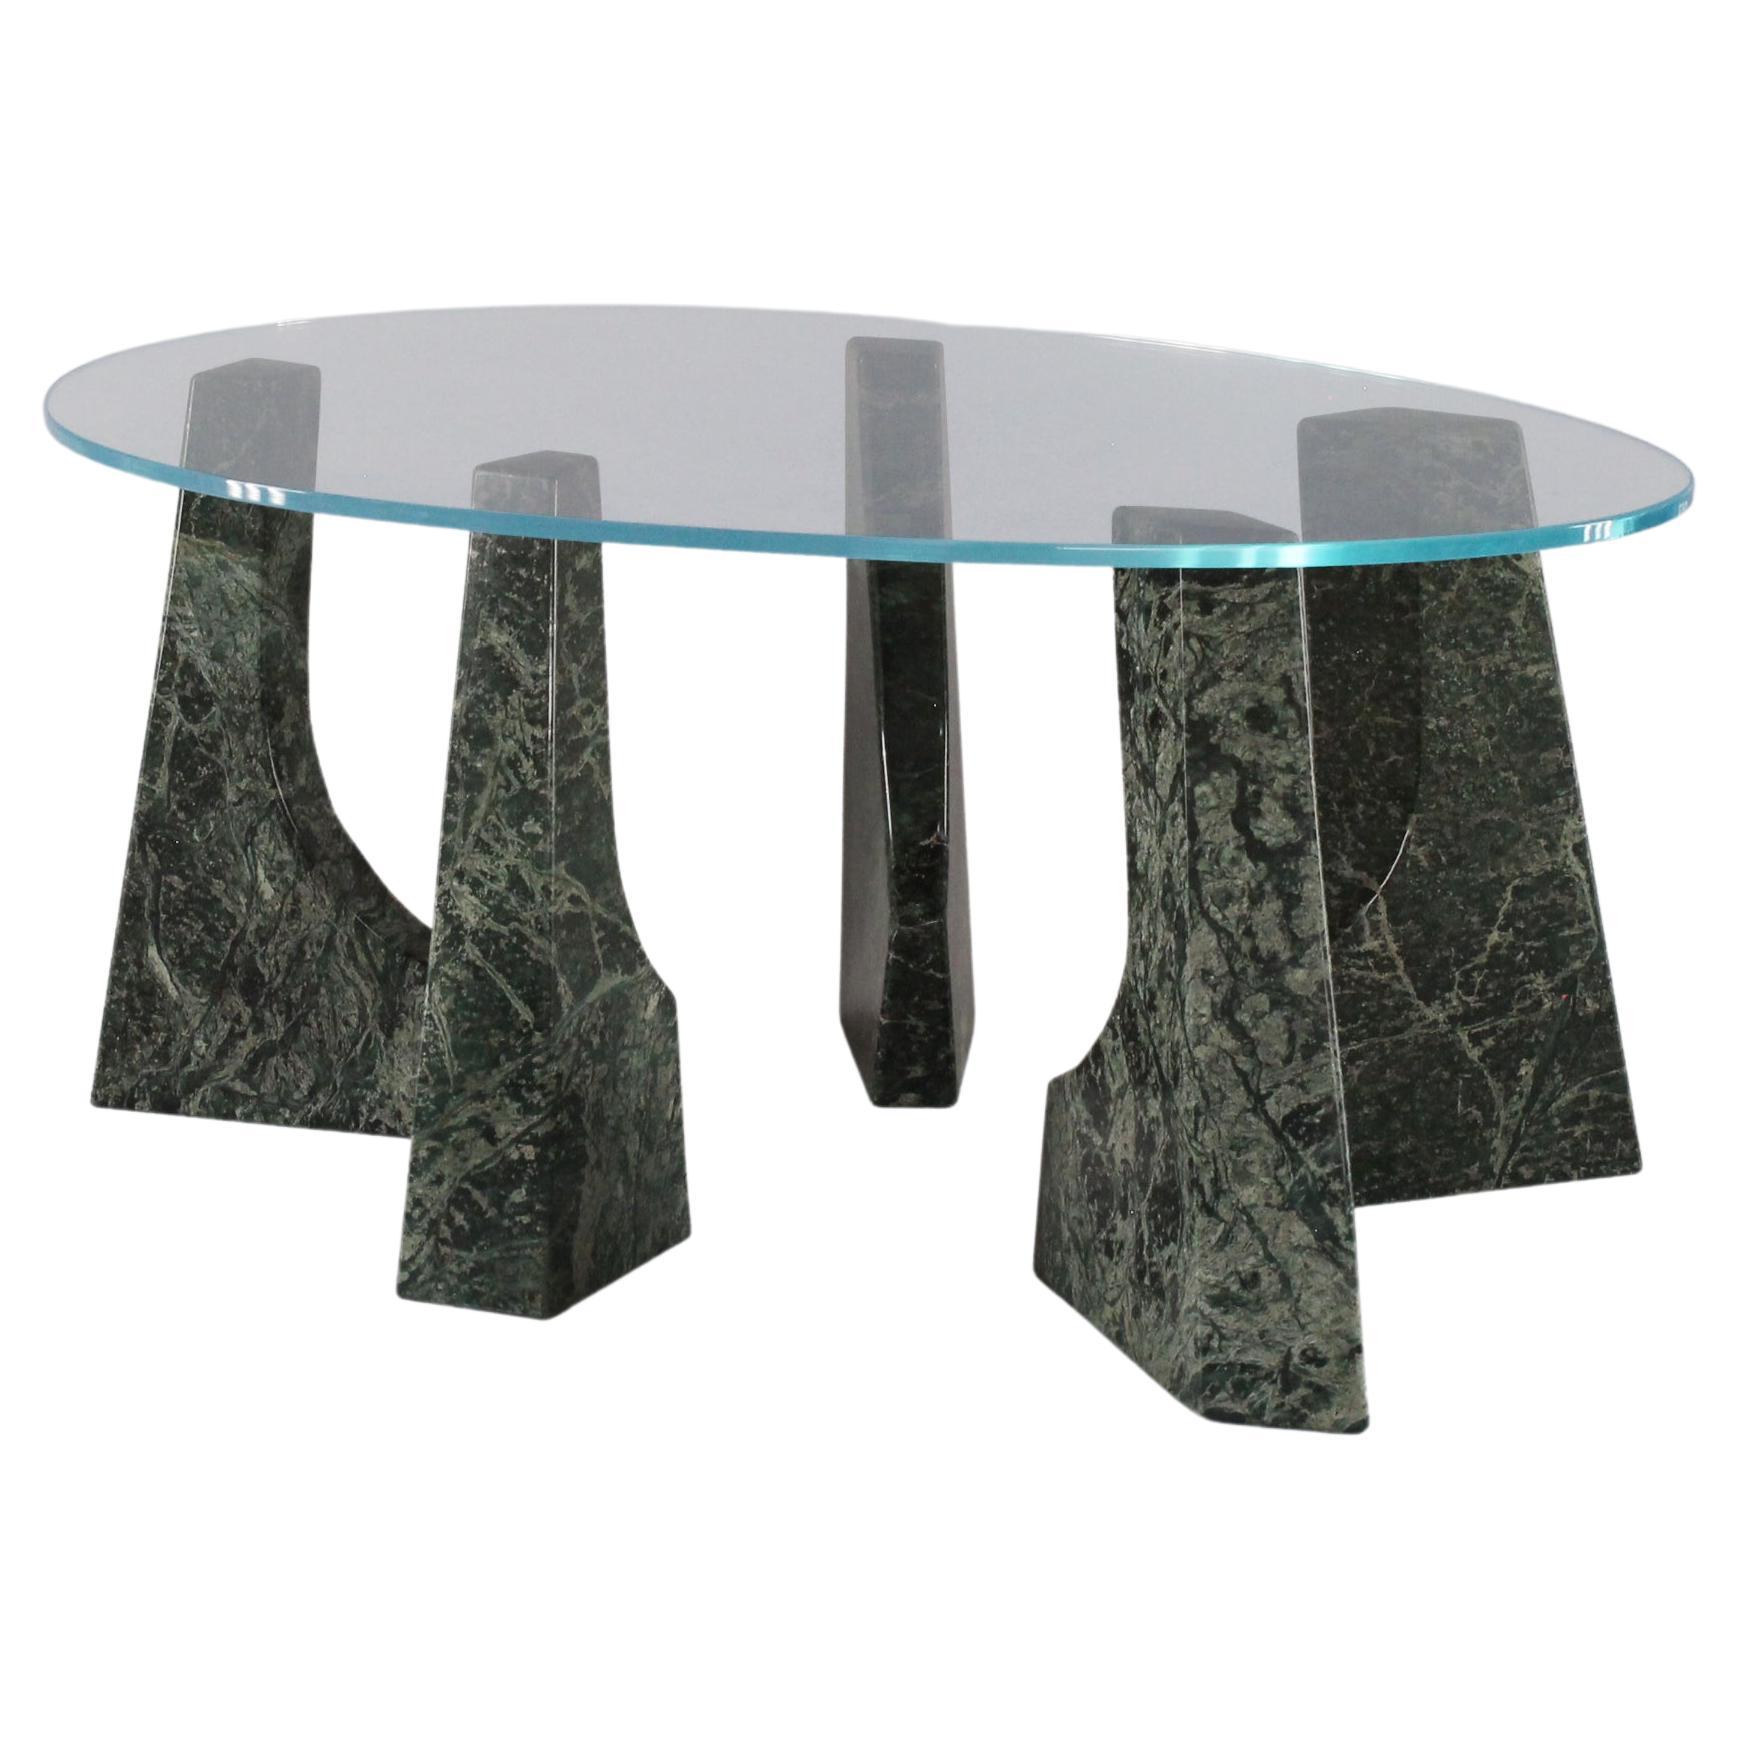 Trama Small Table,Tikal Marble Bases and Glass Top, Contemporary Mexican Design